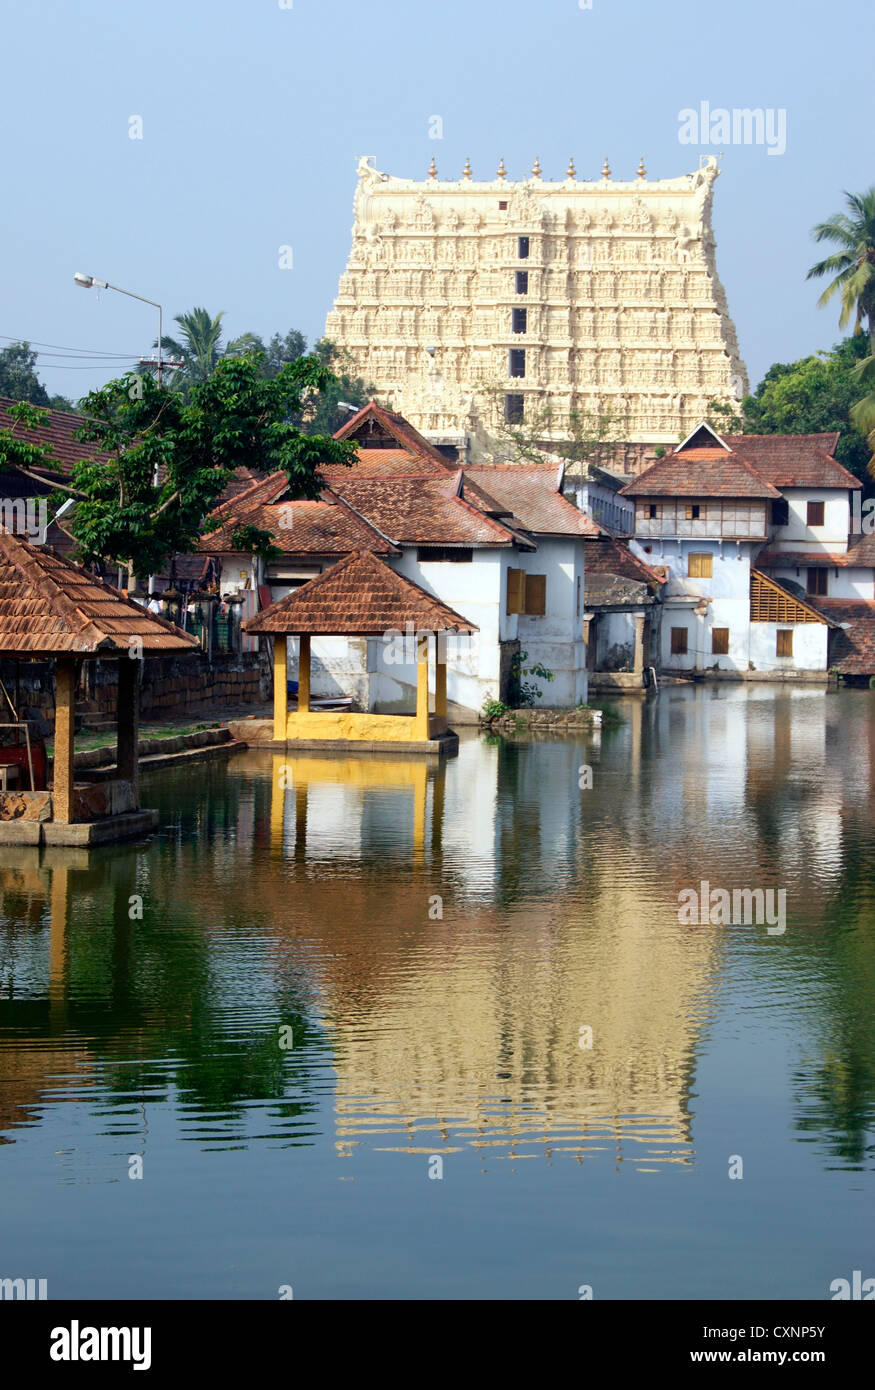 Sree Ananda Padmanabhaswamy temple (Richest Temple in the world) and Water reflection View on Temple pond at Kerala India Stock Photo